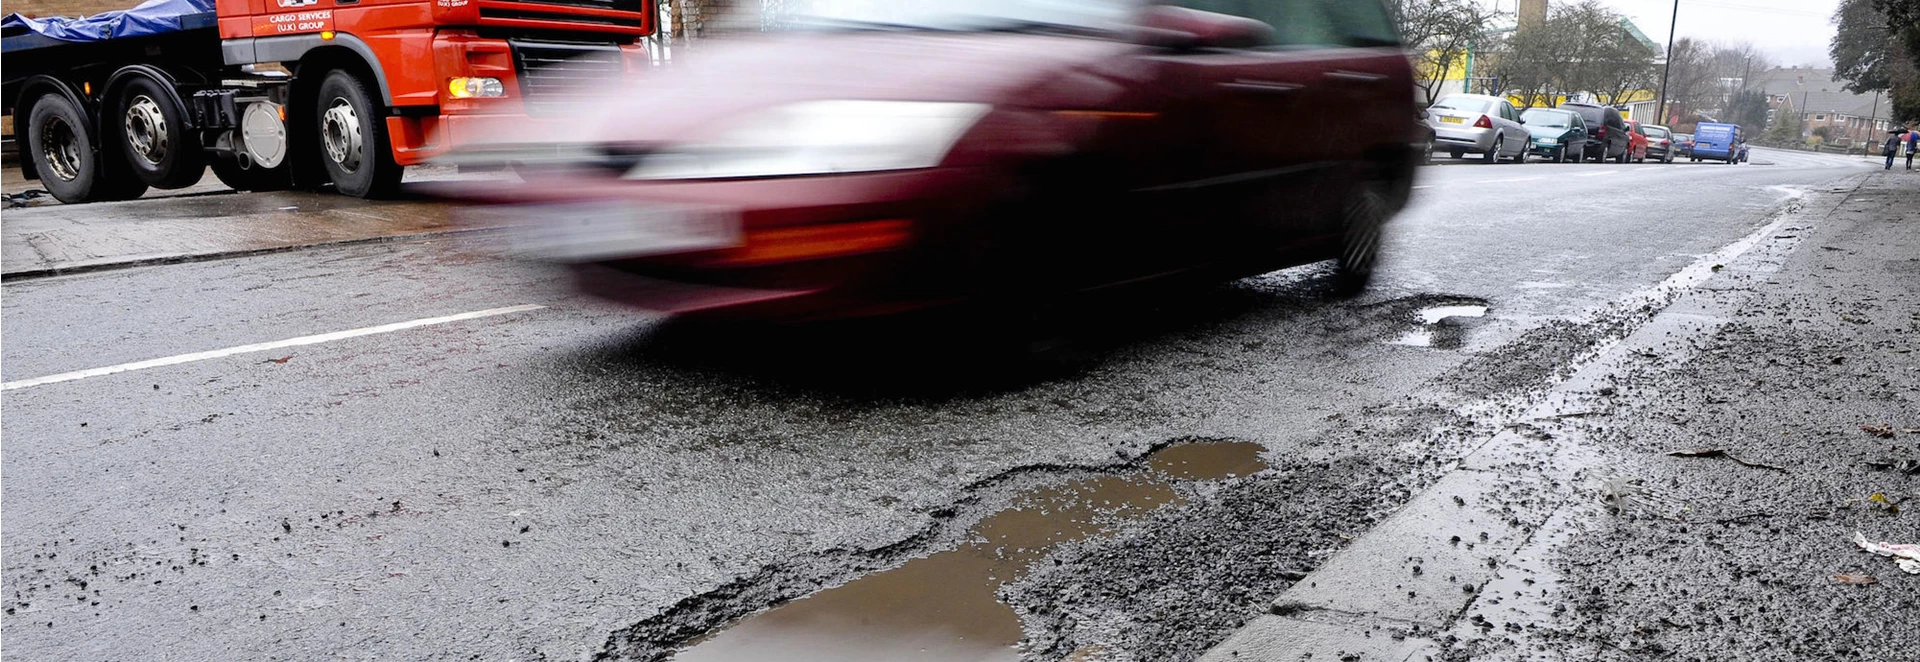 One million cars damaged by potholes in the last year 